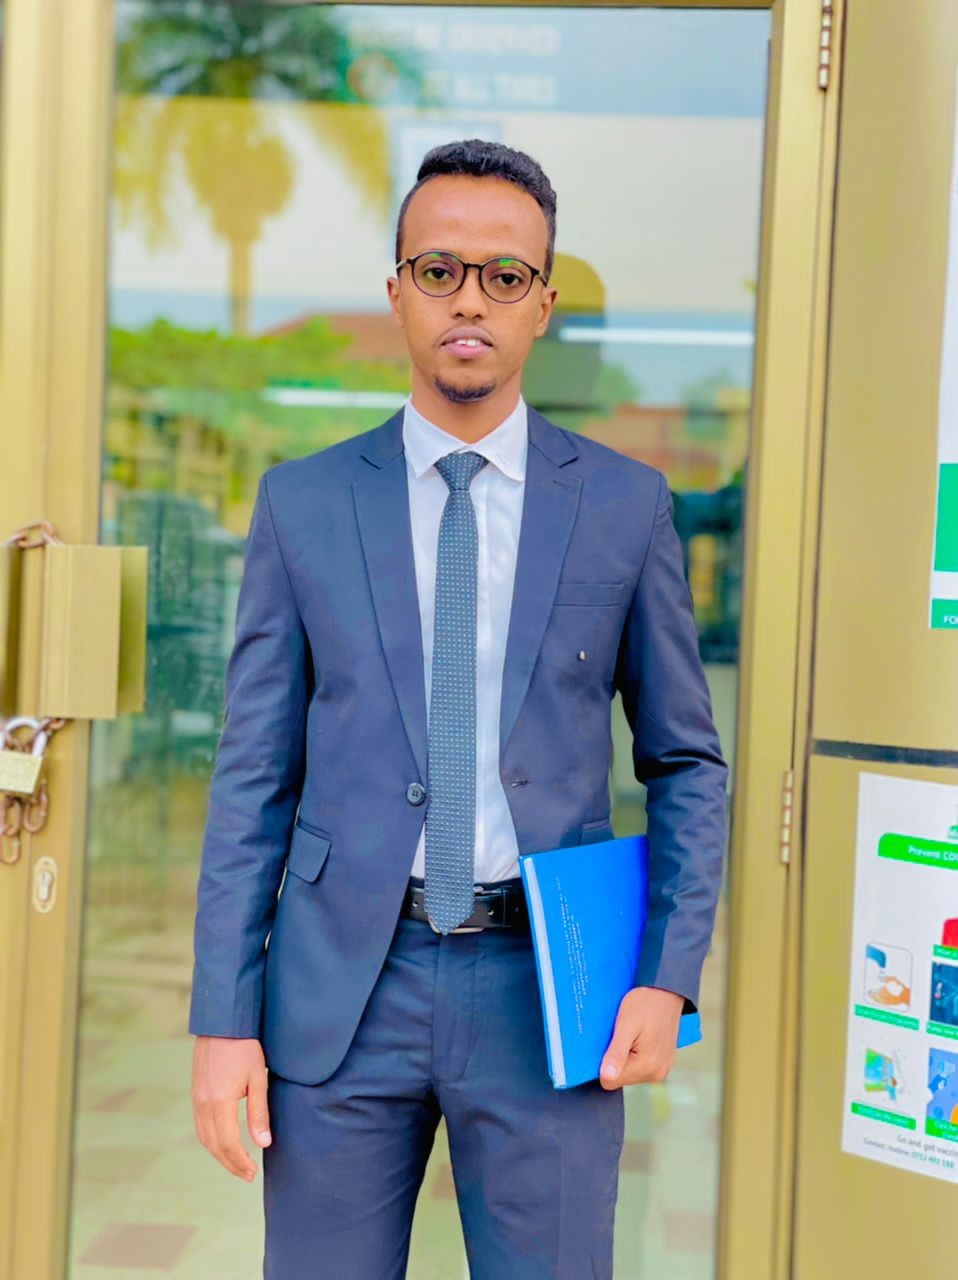 kiu-explorer-of-the-day-mohamed-abdikani-a-few-steps-from-his-dream-after-a-successful-thesis-defense